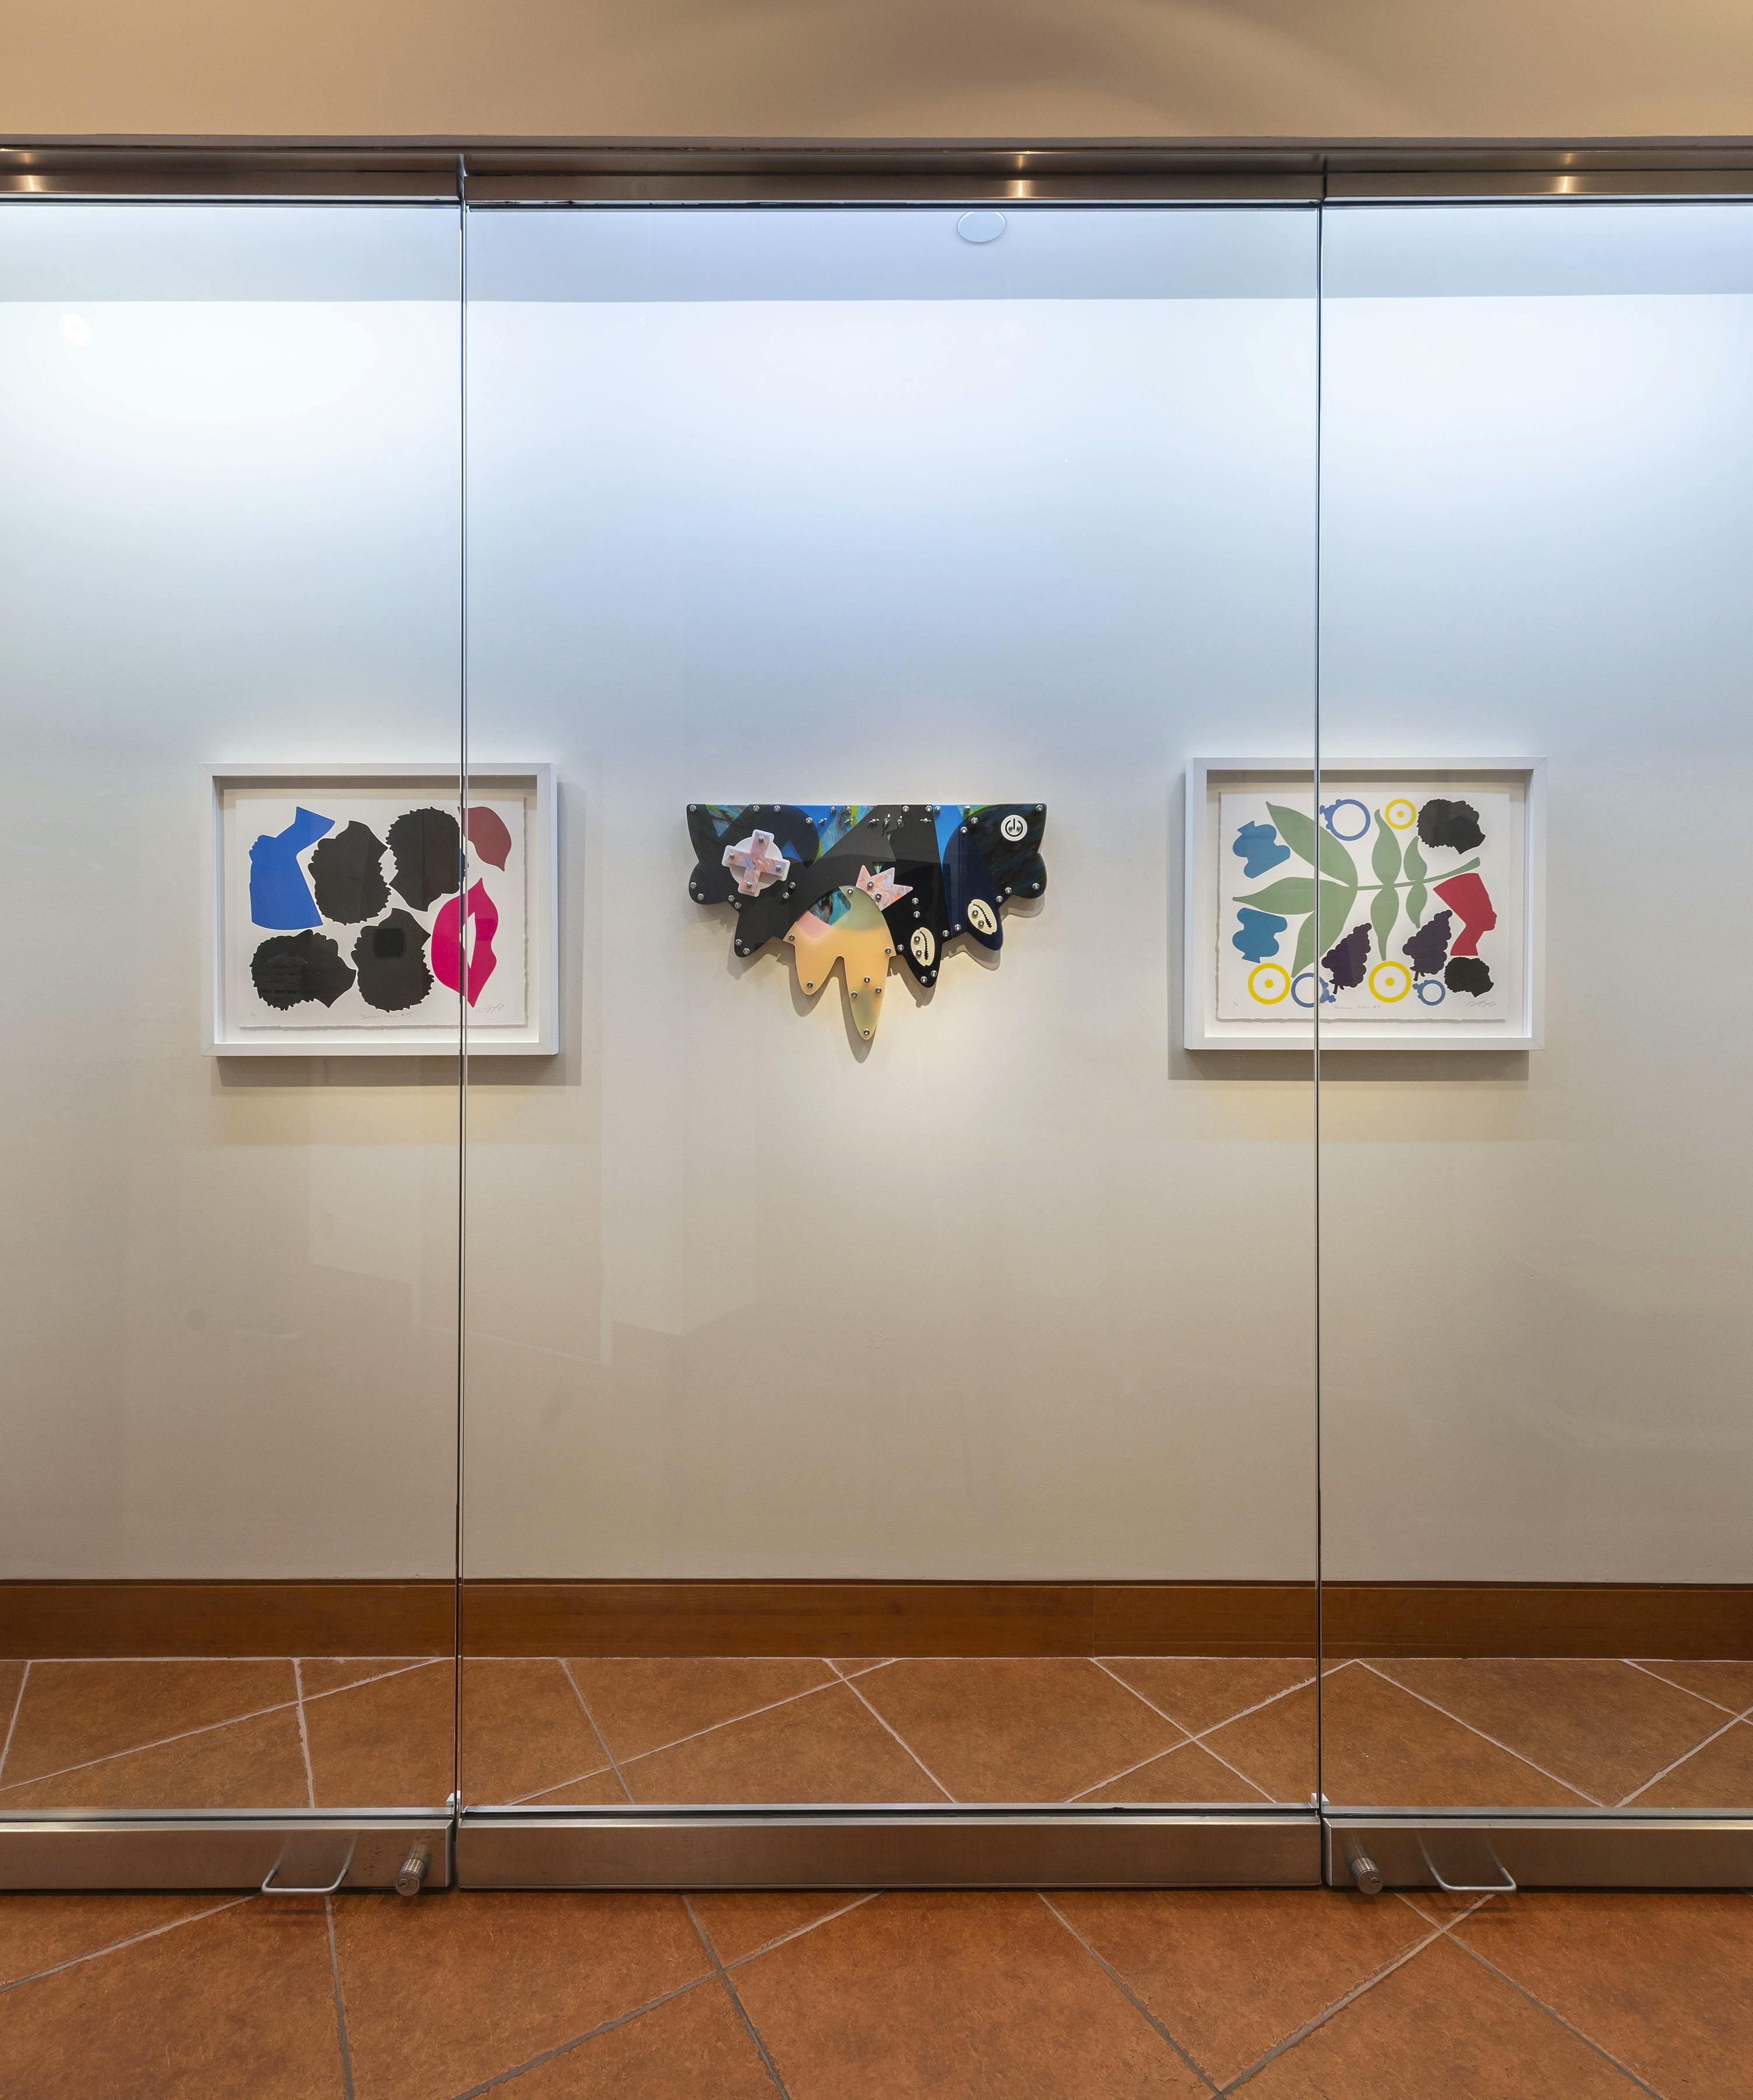 Three works by artist Damien Davis, two framed figurative prints and one black abstract wall sculpture, installed on a white wall behind a glass case at Montclair State University.